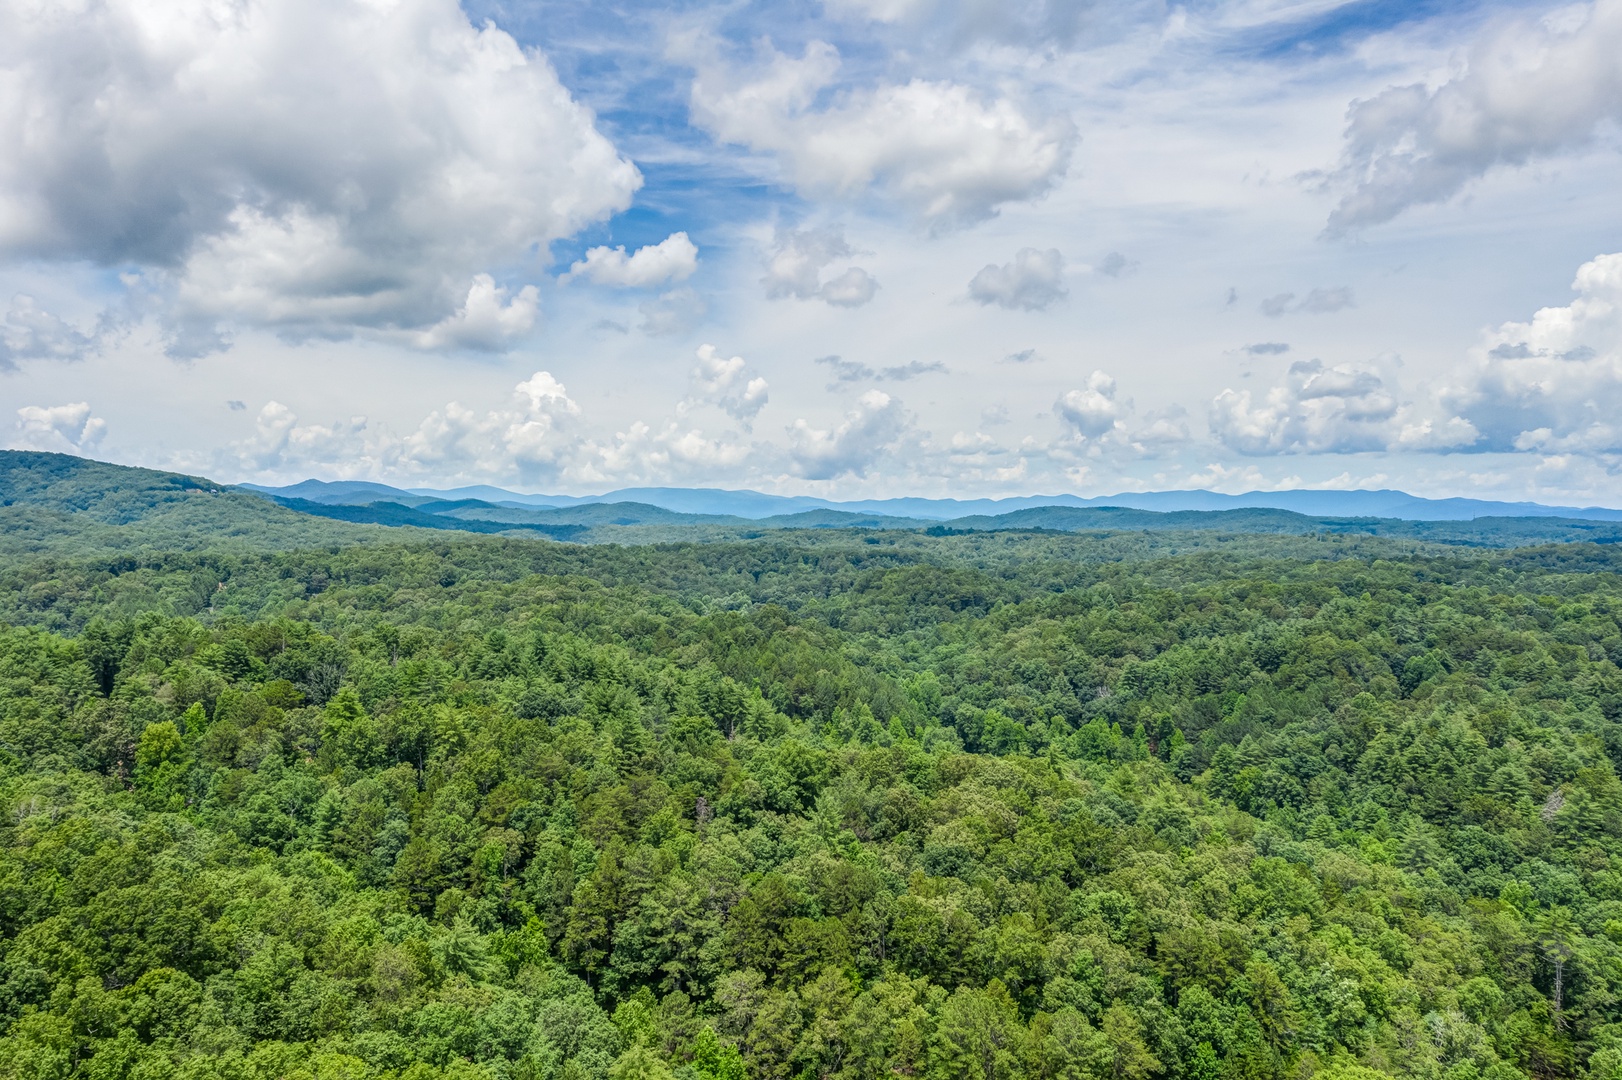 Enjoy the stunning landscape during your visit to North Georgia Mountains